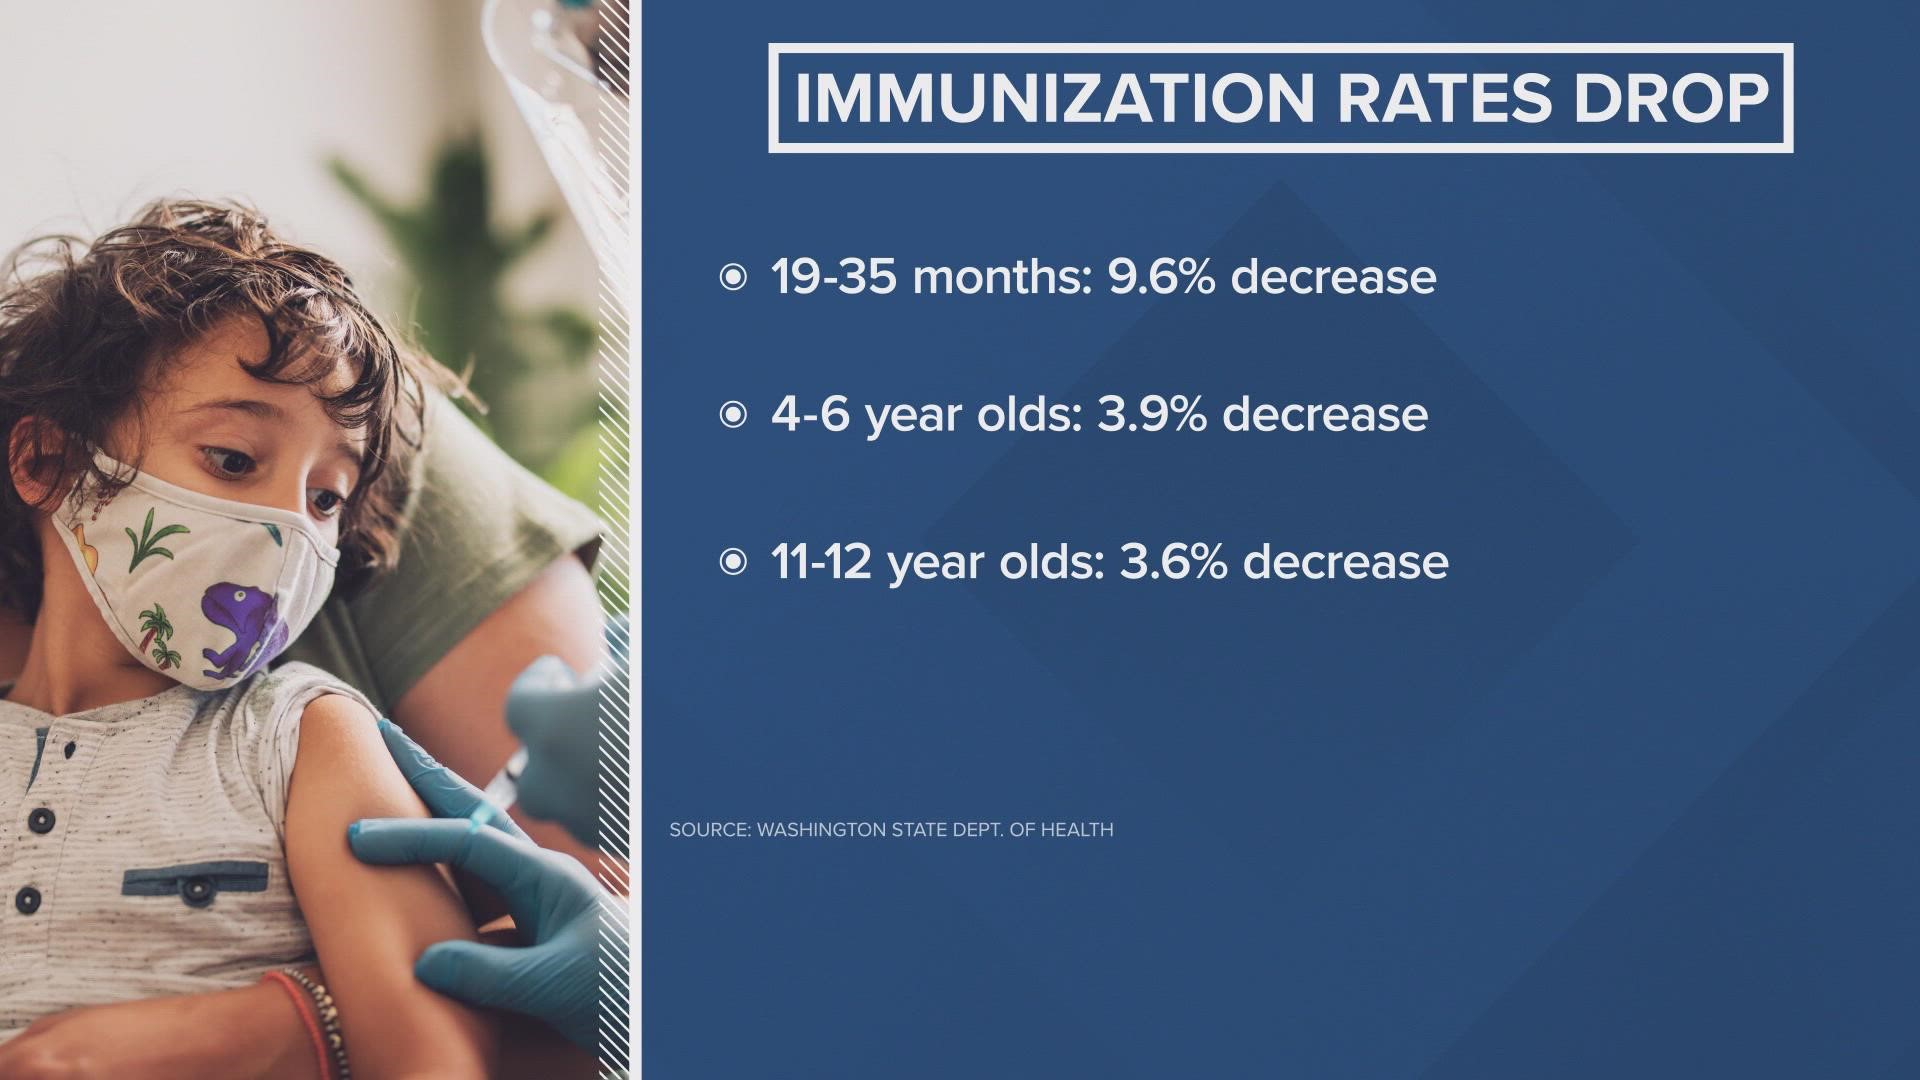 A new report shows routine childhood immunization rates in Washington decreased during the pandemic, dropping by 13% in 2021 when compared to pre-pandemic levels.